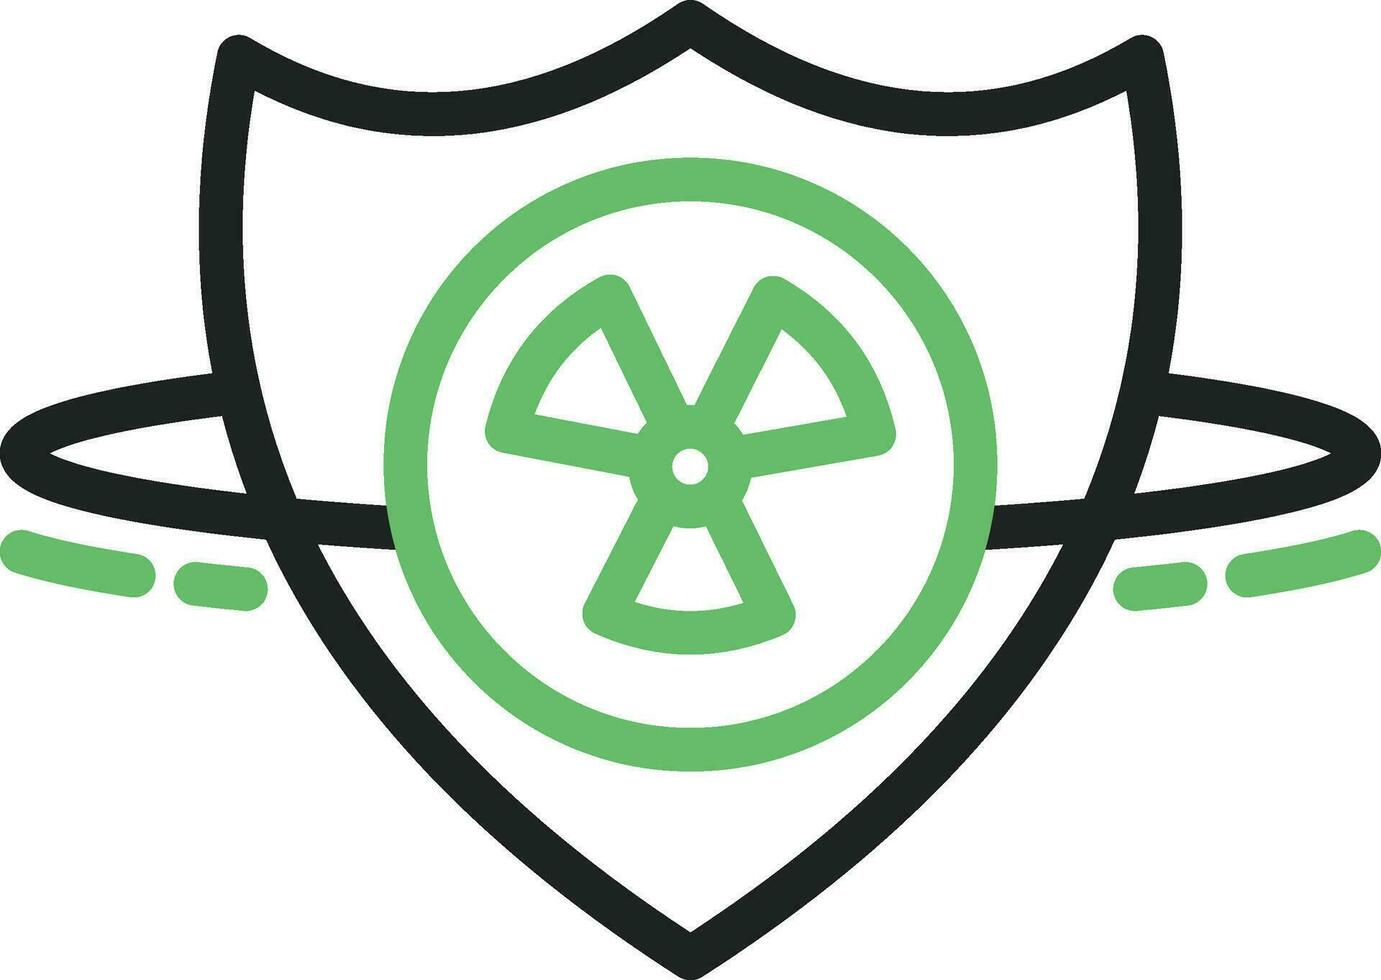 Protection icon vector image. Suitable for mobile apps, web apps and print media.